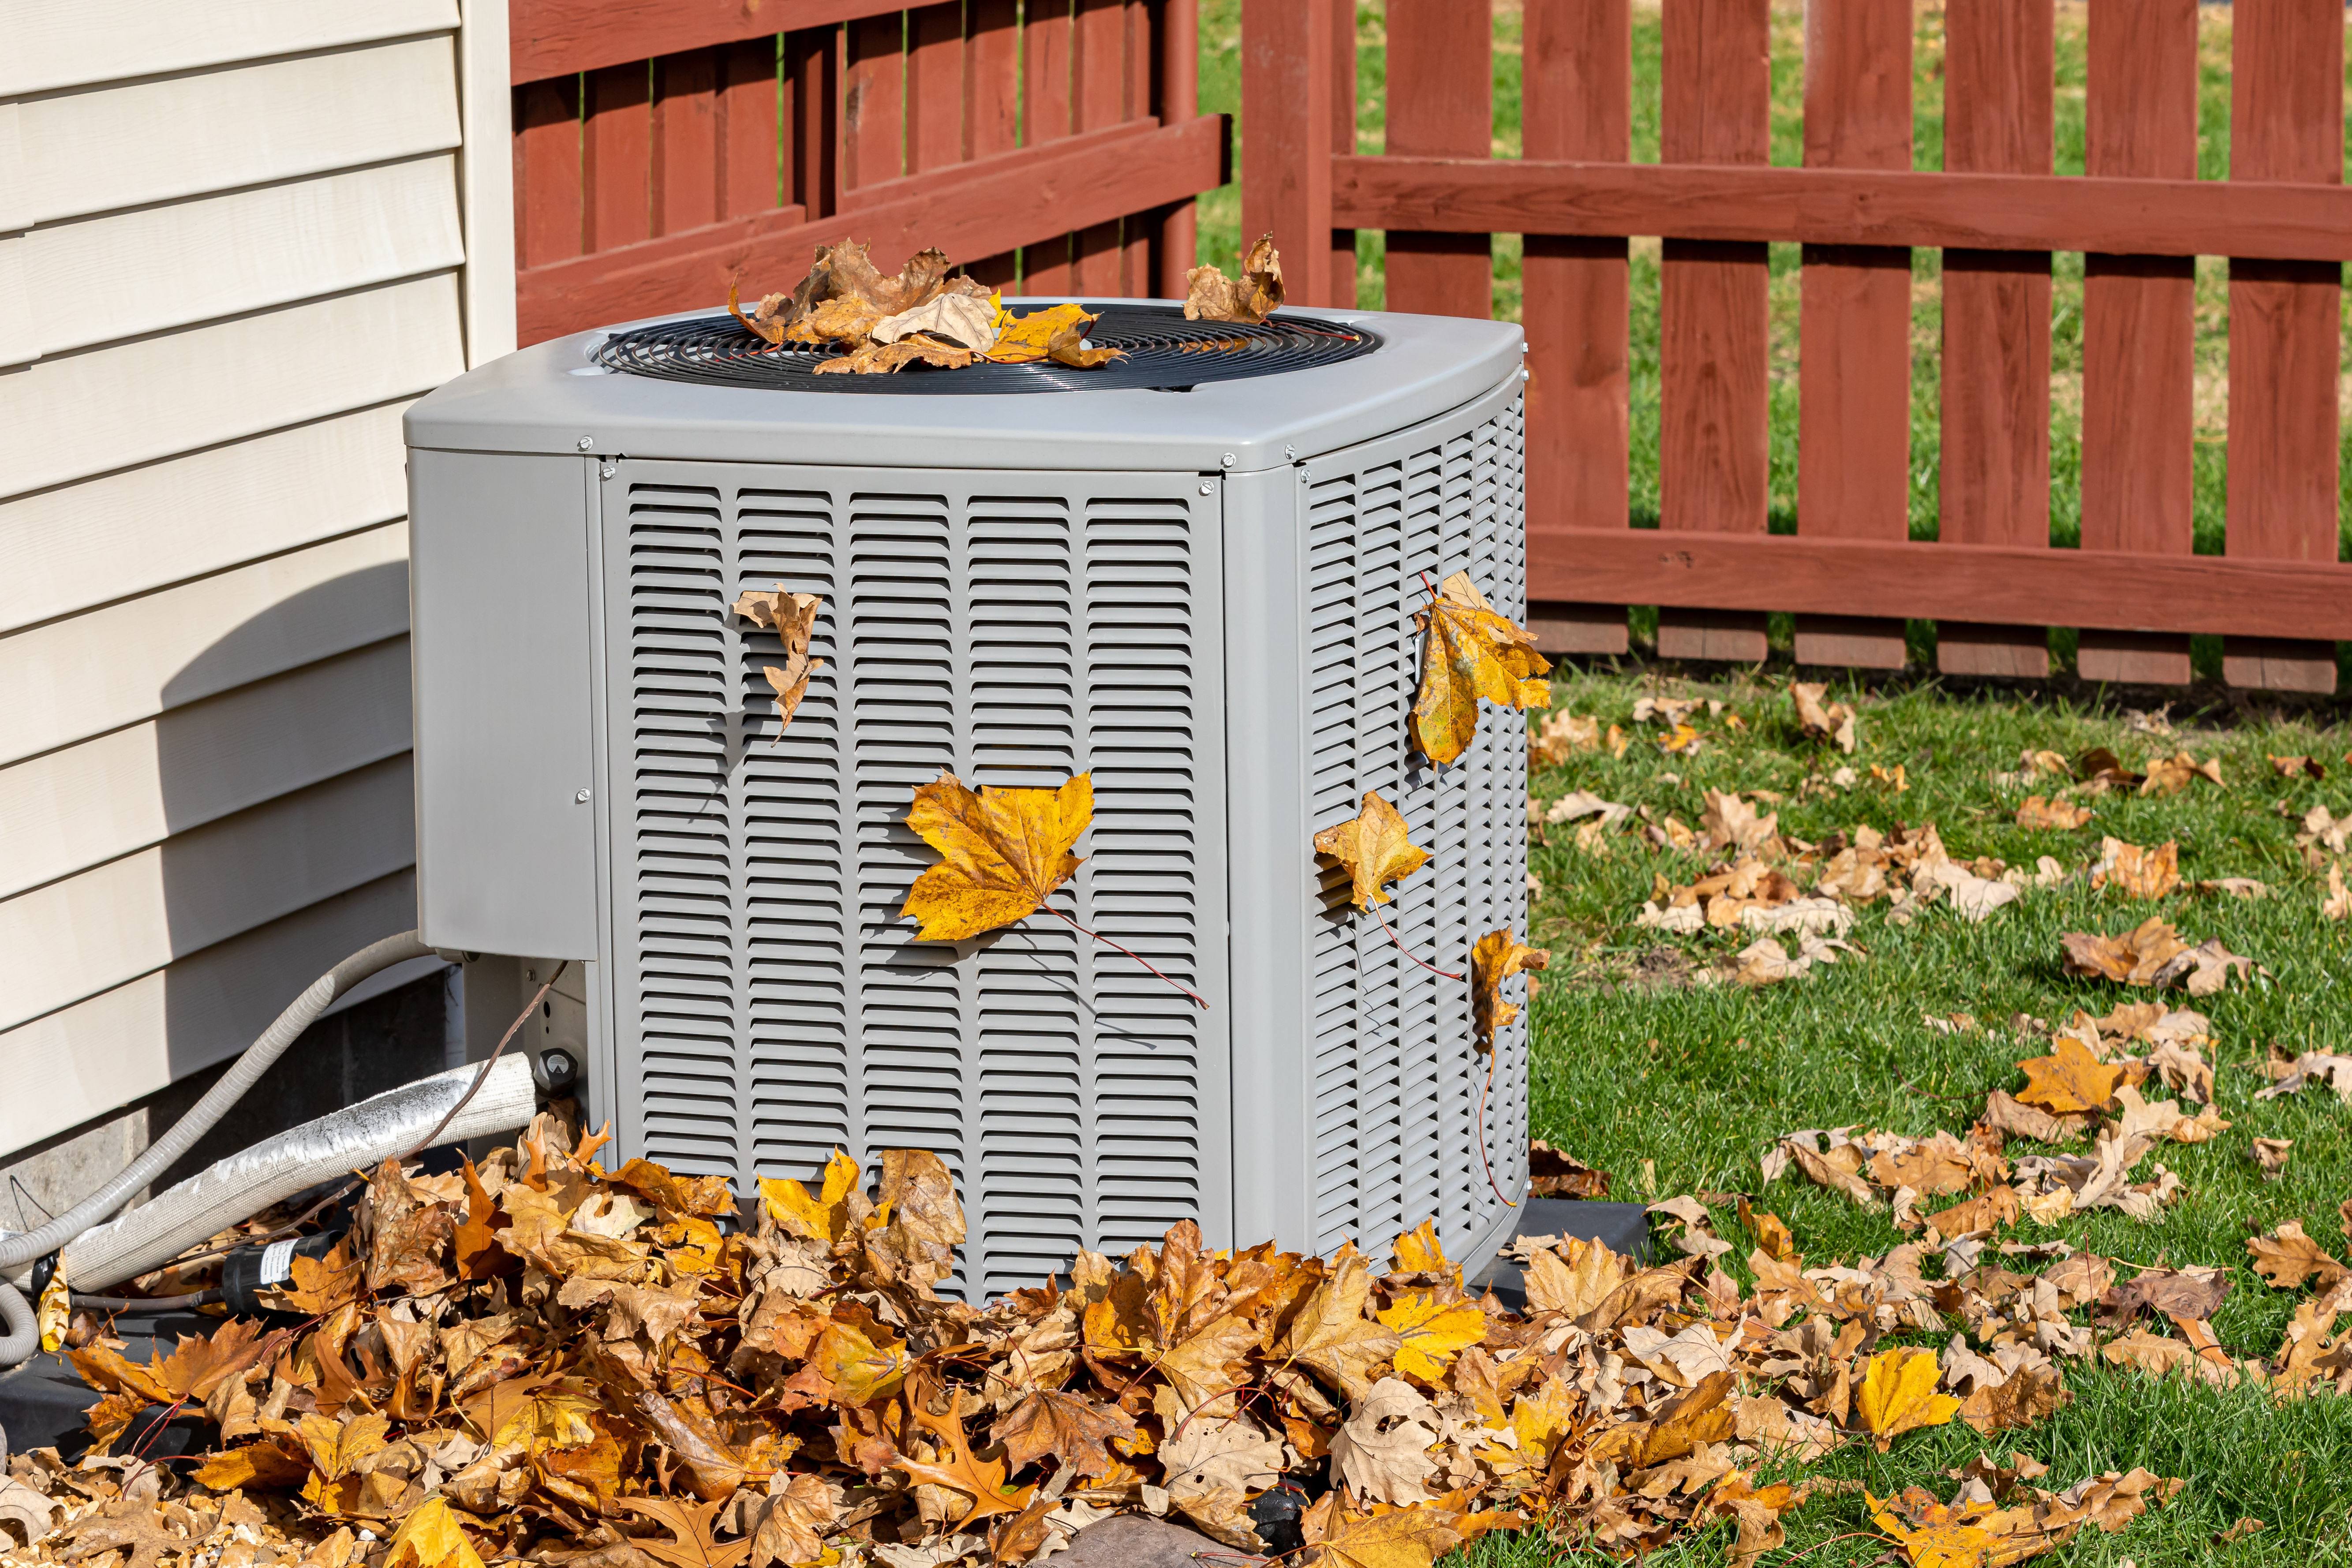 AC unit surrounded by fallen leaves